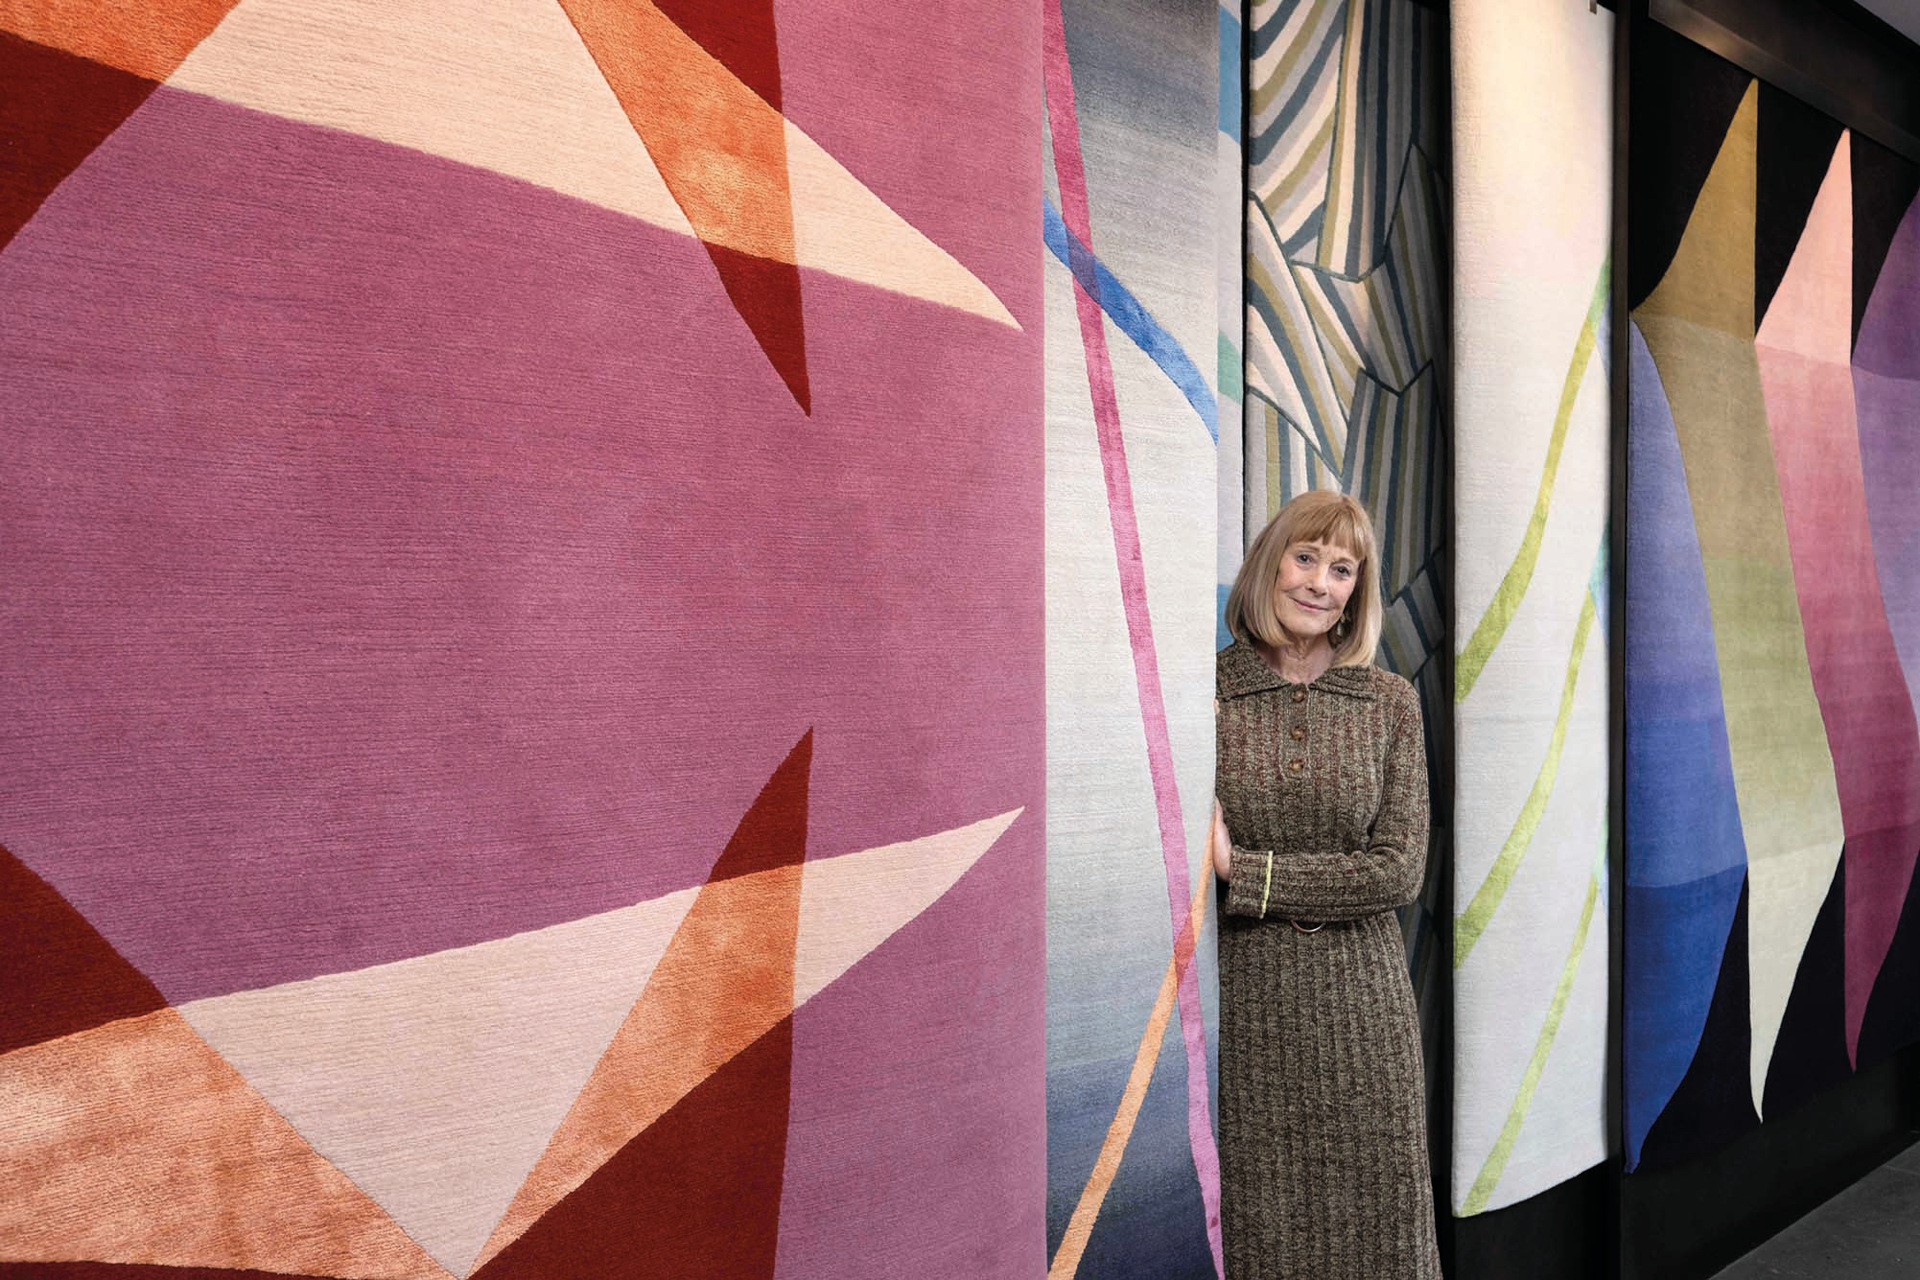 Deirdre Dyson Offers Beautiful Hand-Designed Carpets Hand-Knotted In Nepal